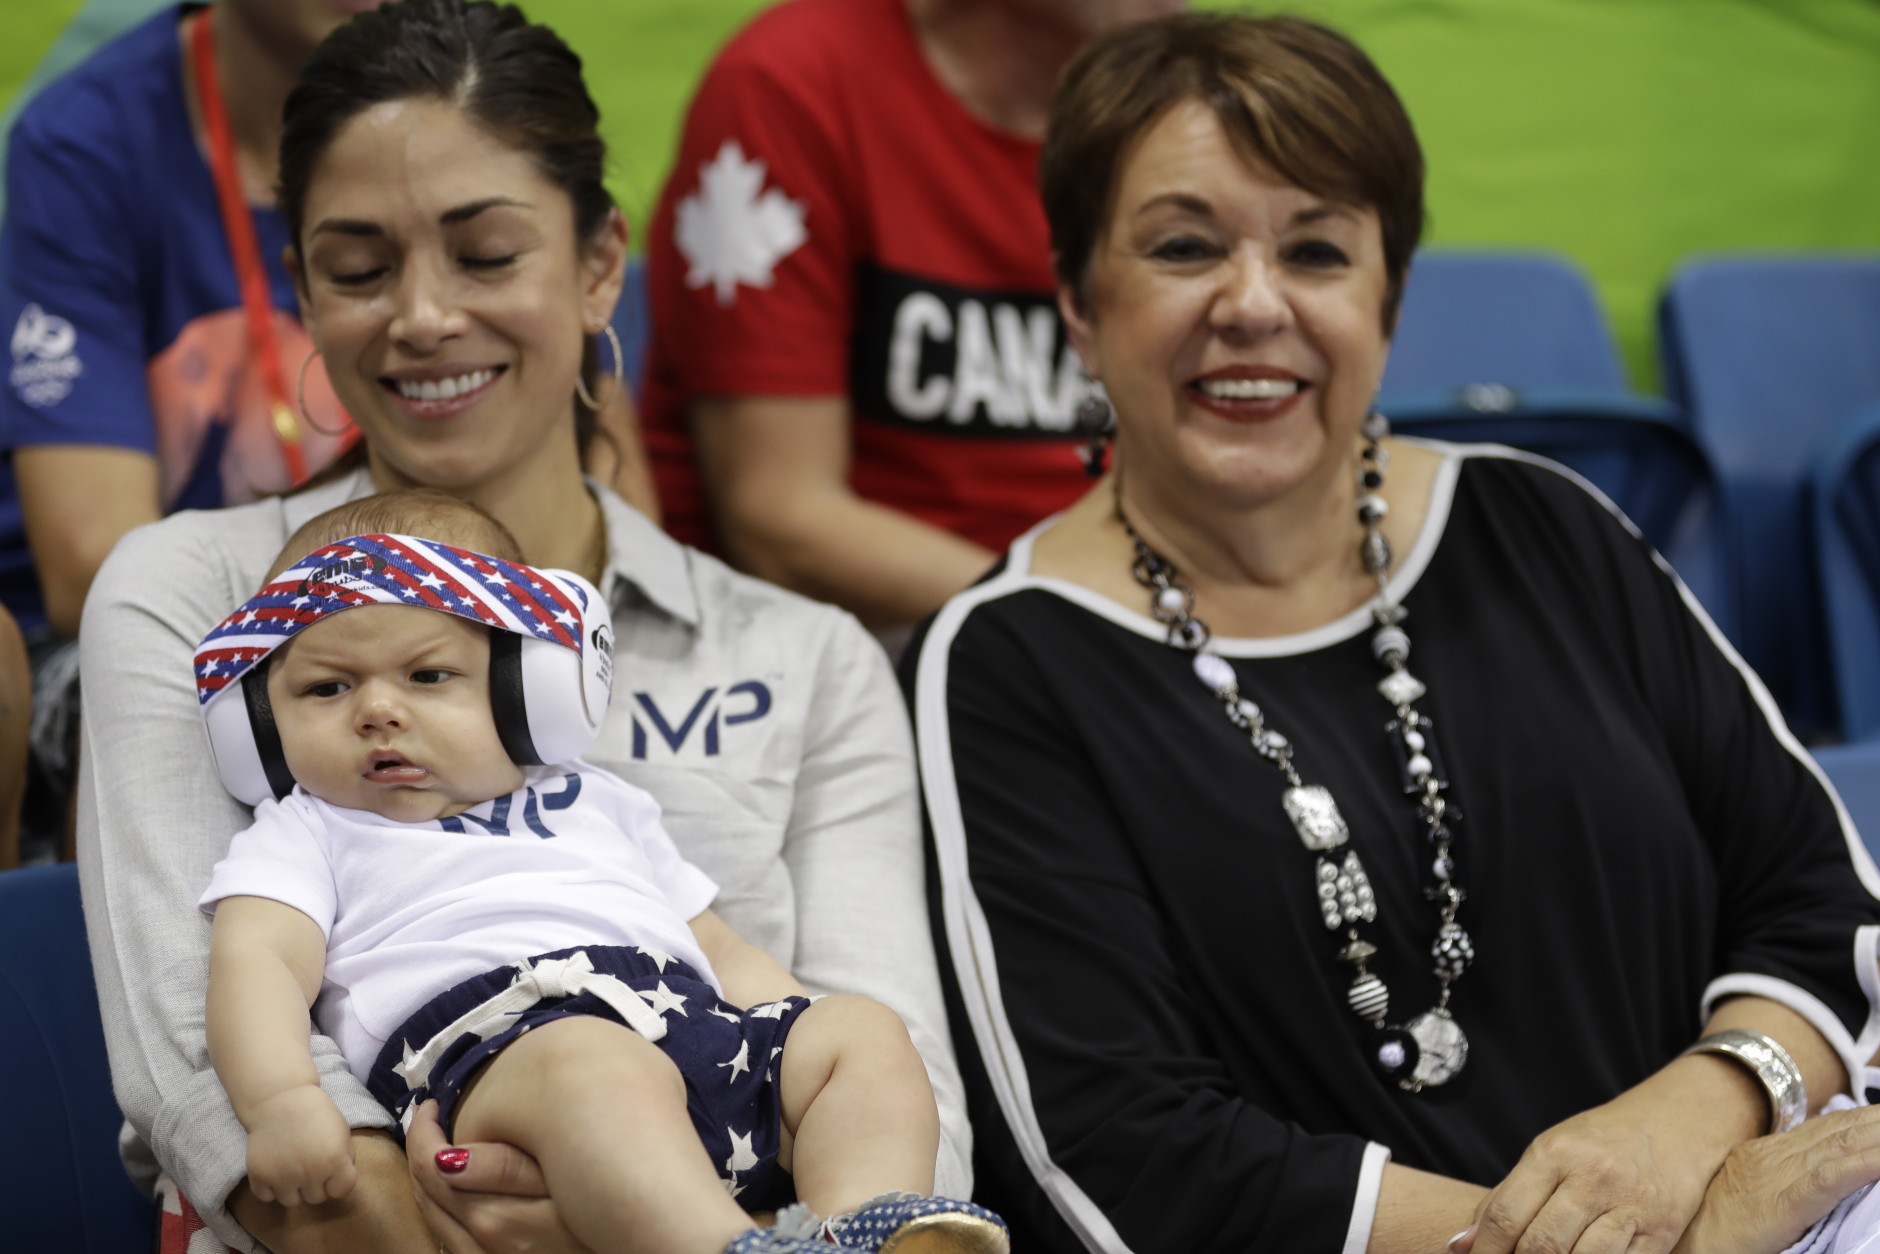 United States' Michael Phelps' son Boomer, with his fiancee Nicole Johnson and mother Debbie, wears ear protection during the swimming competitions at the 2016 Summer Olympics, Monday, Aug. 8, 2016, in Rio de Janeiro, Brazil. (AP Photo/Michael Sohn)